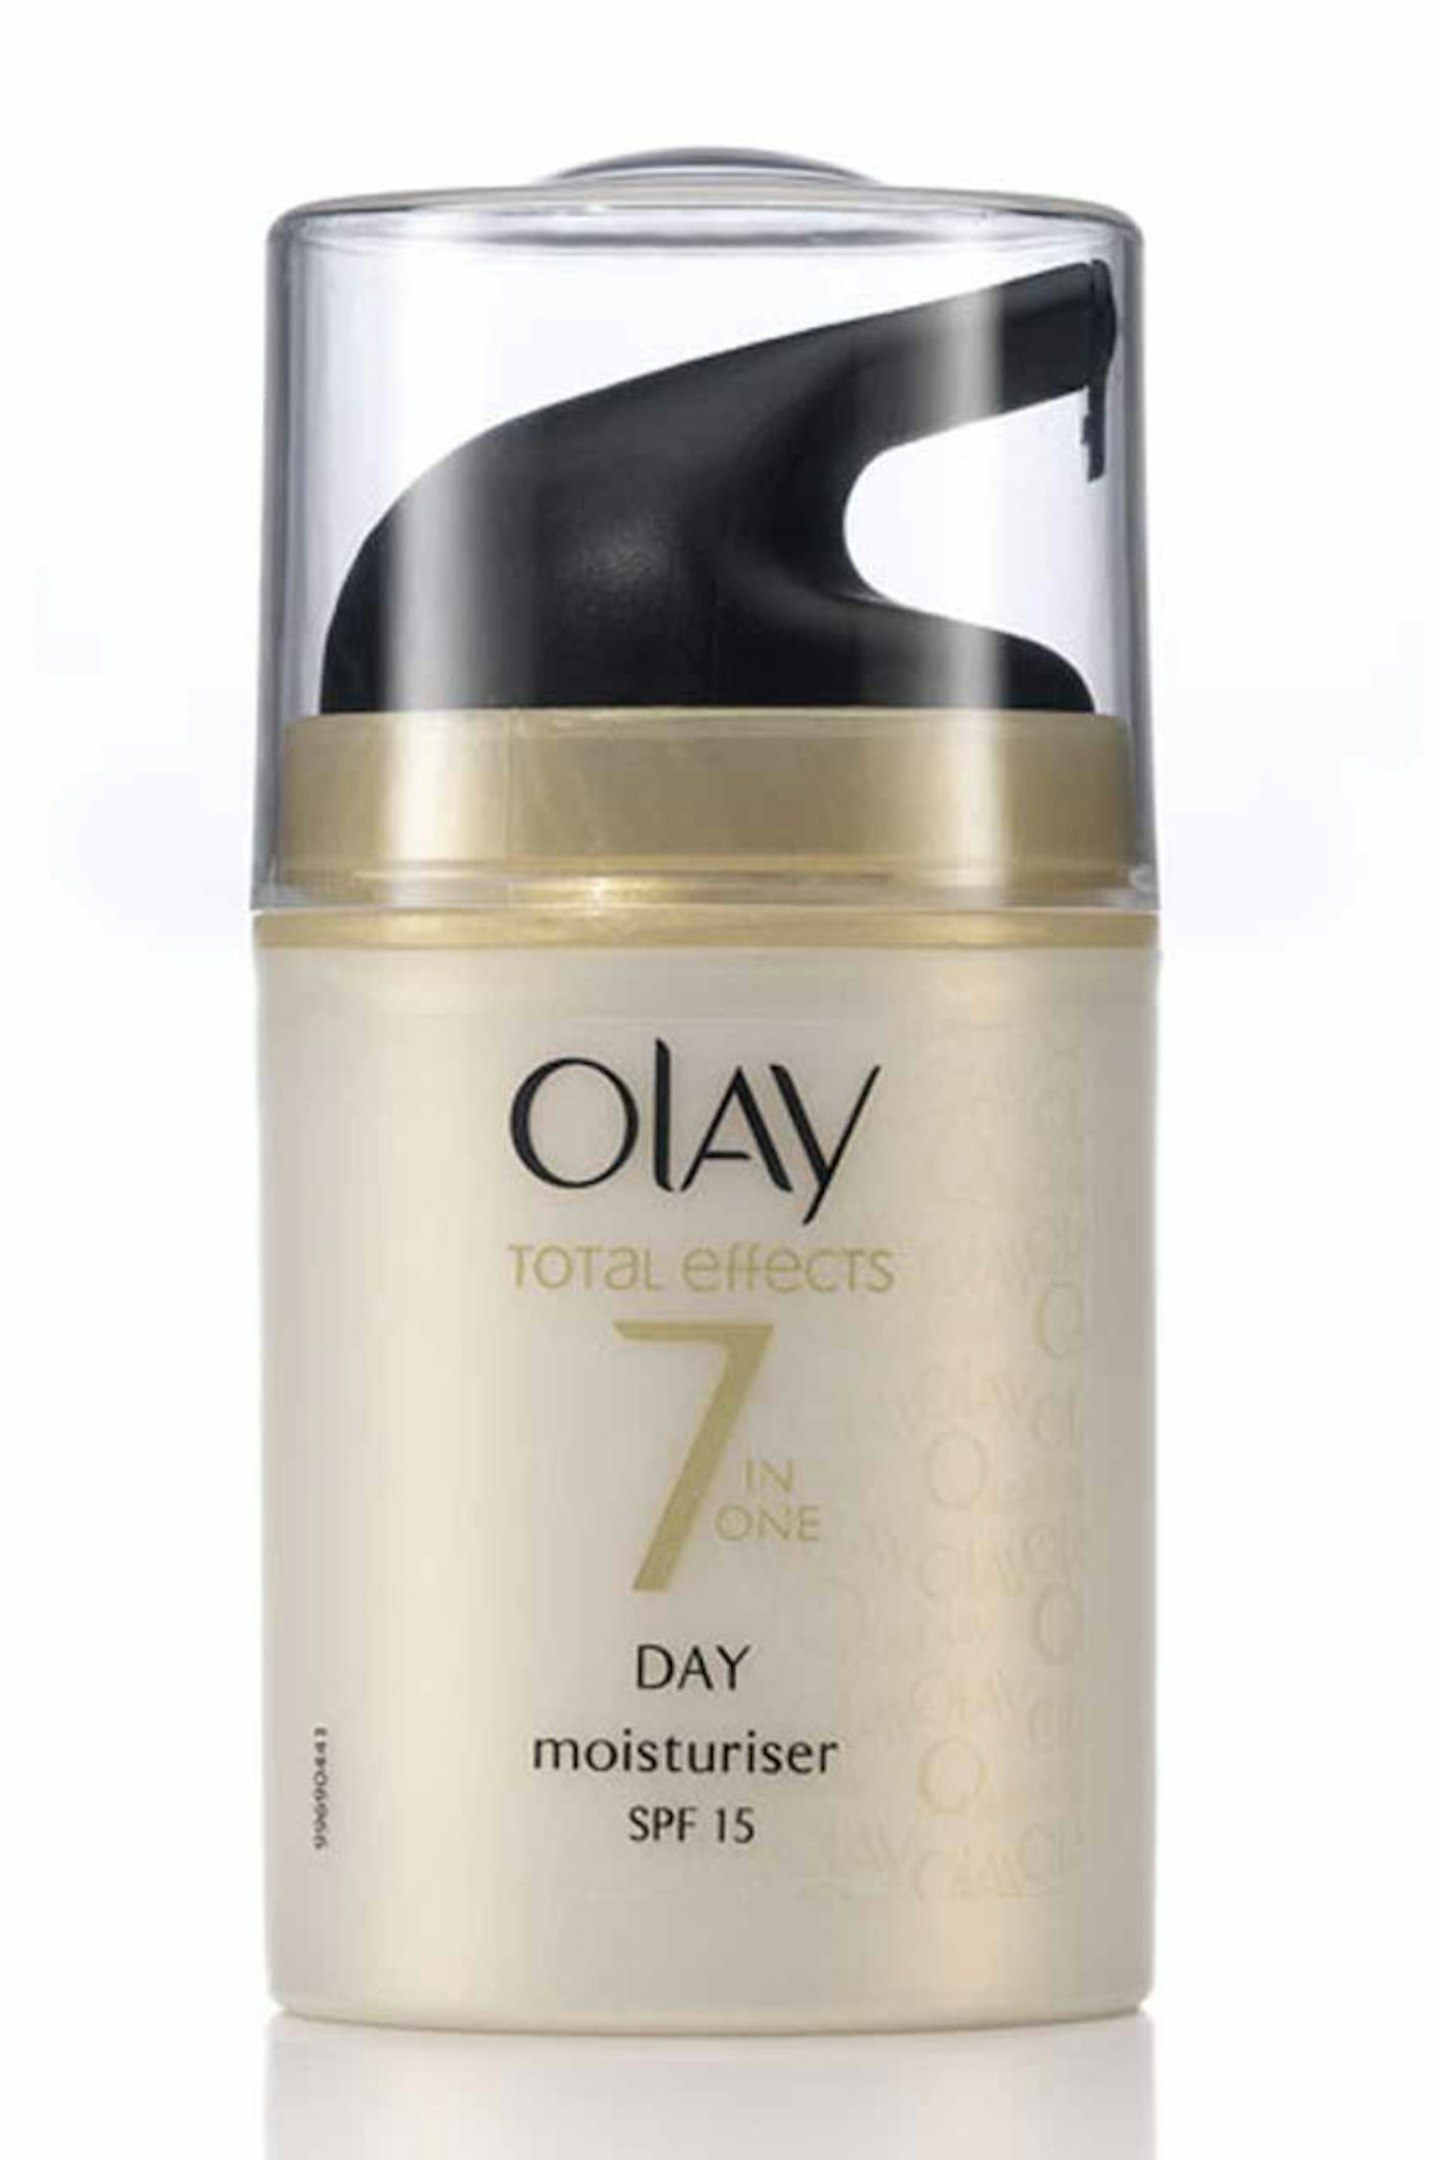 7. Olay Total Effects Day Moisturiser, £14.99